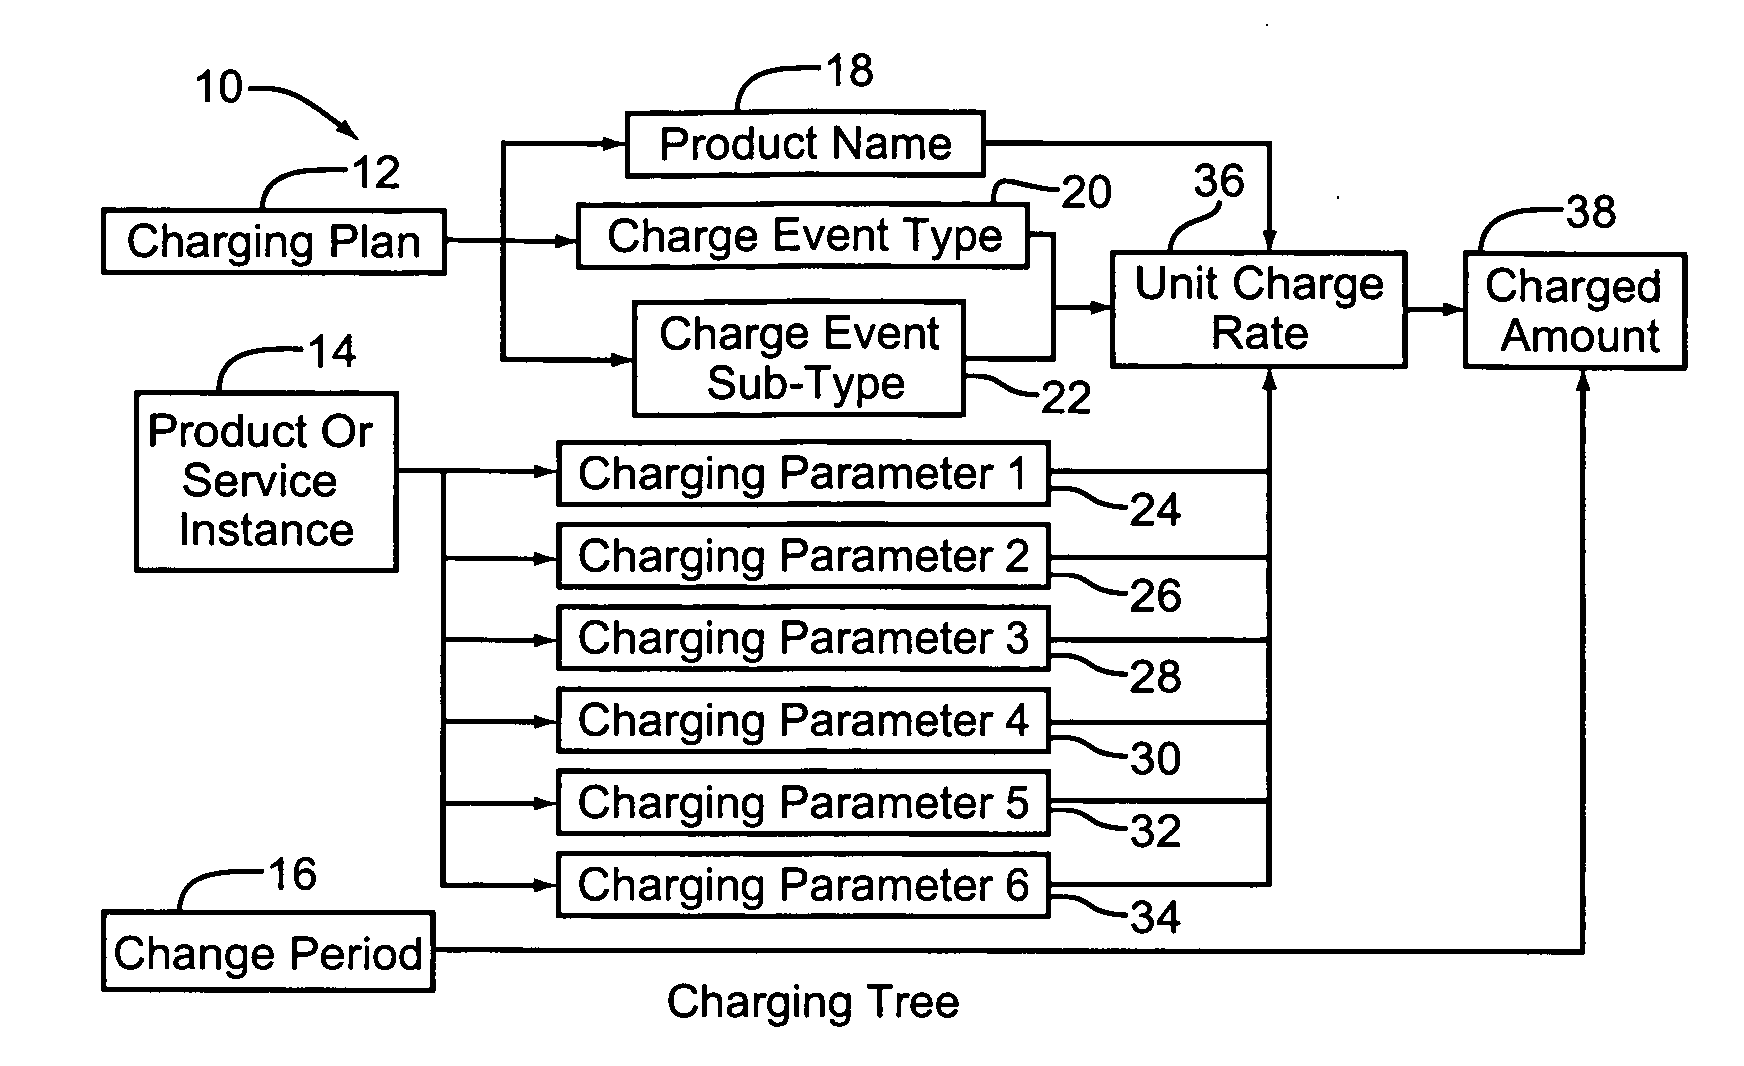 Configurable charging system for a telecommunications service provider